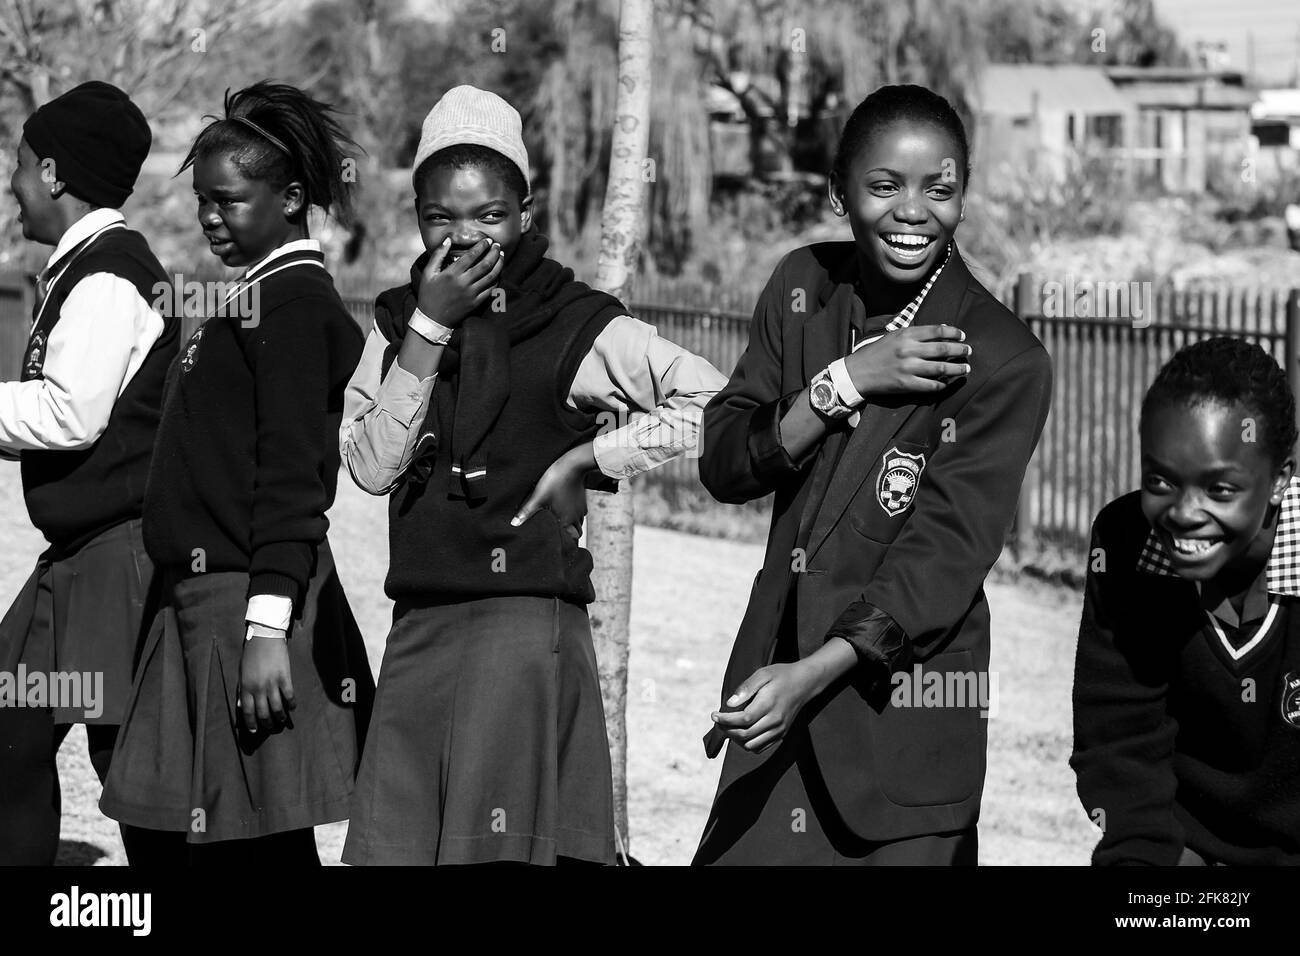 JOHANNESBURG, SOUTH AFRICA - Mar 13, 2021: Johannesburg, South Africa - June 19, 2014: Diverse African high school pupils messing about on the sports Stock Photo